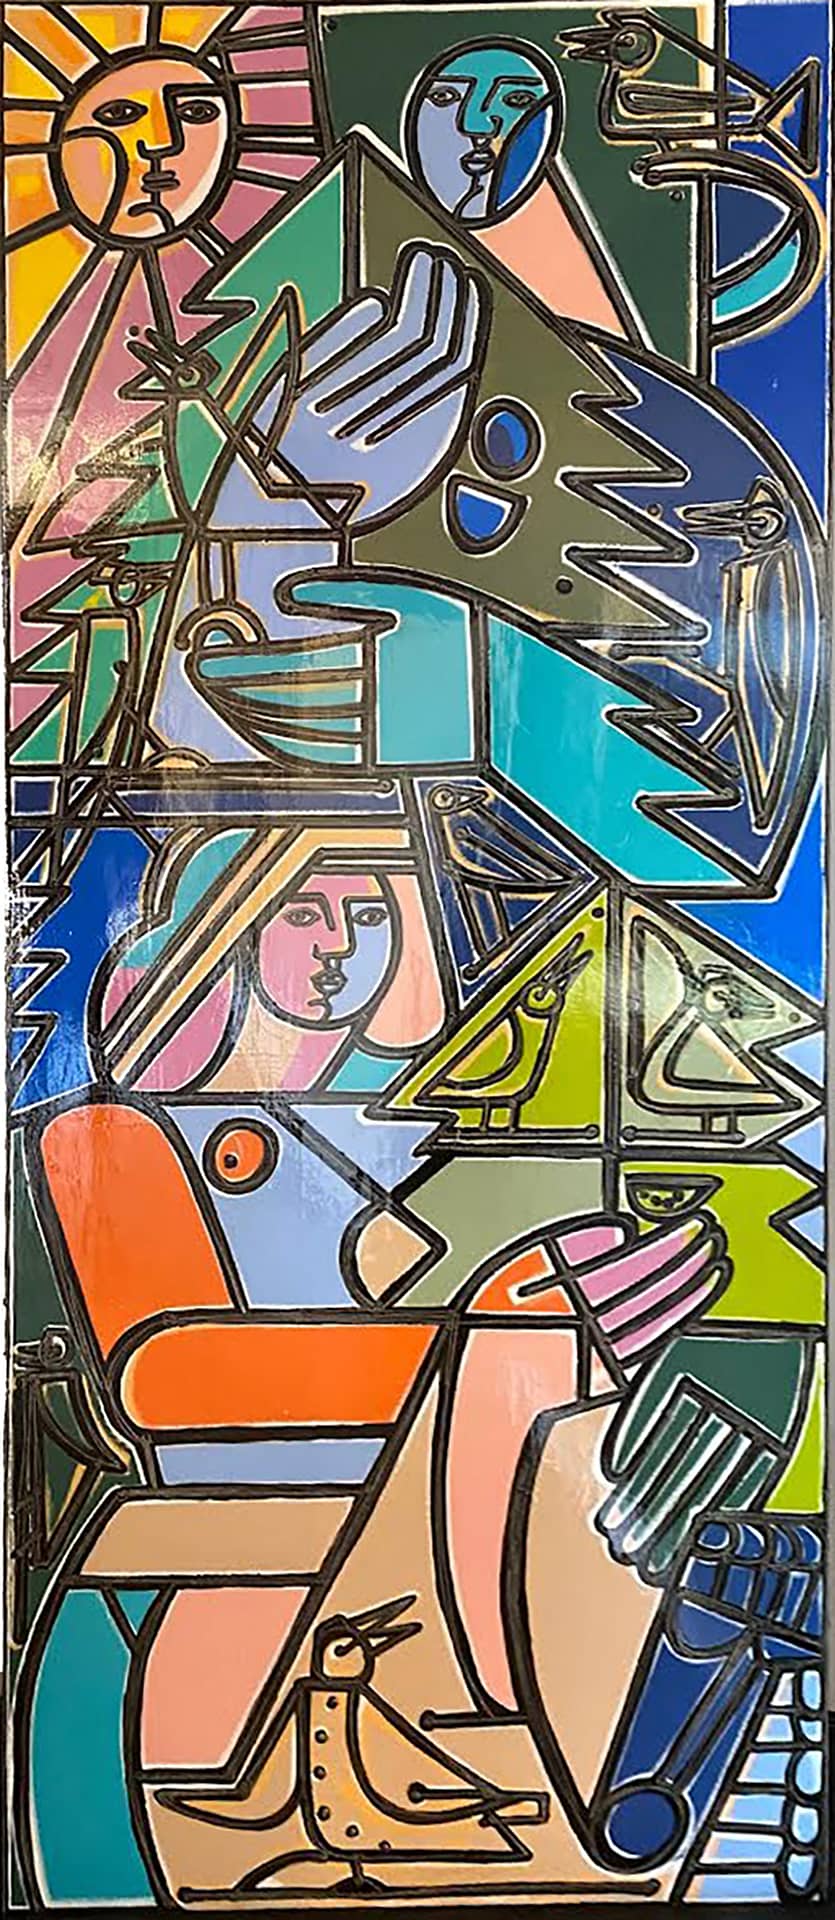 In the Mountains Women Shake the Trees & Make the Birds Sing_America Martin_Oil and Acrylic on Canvas_96 x 40